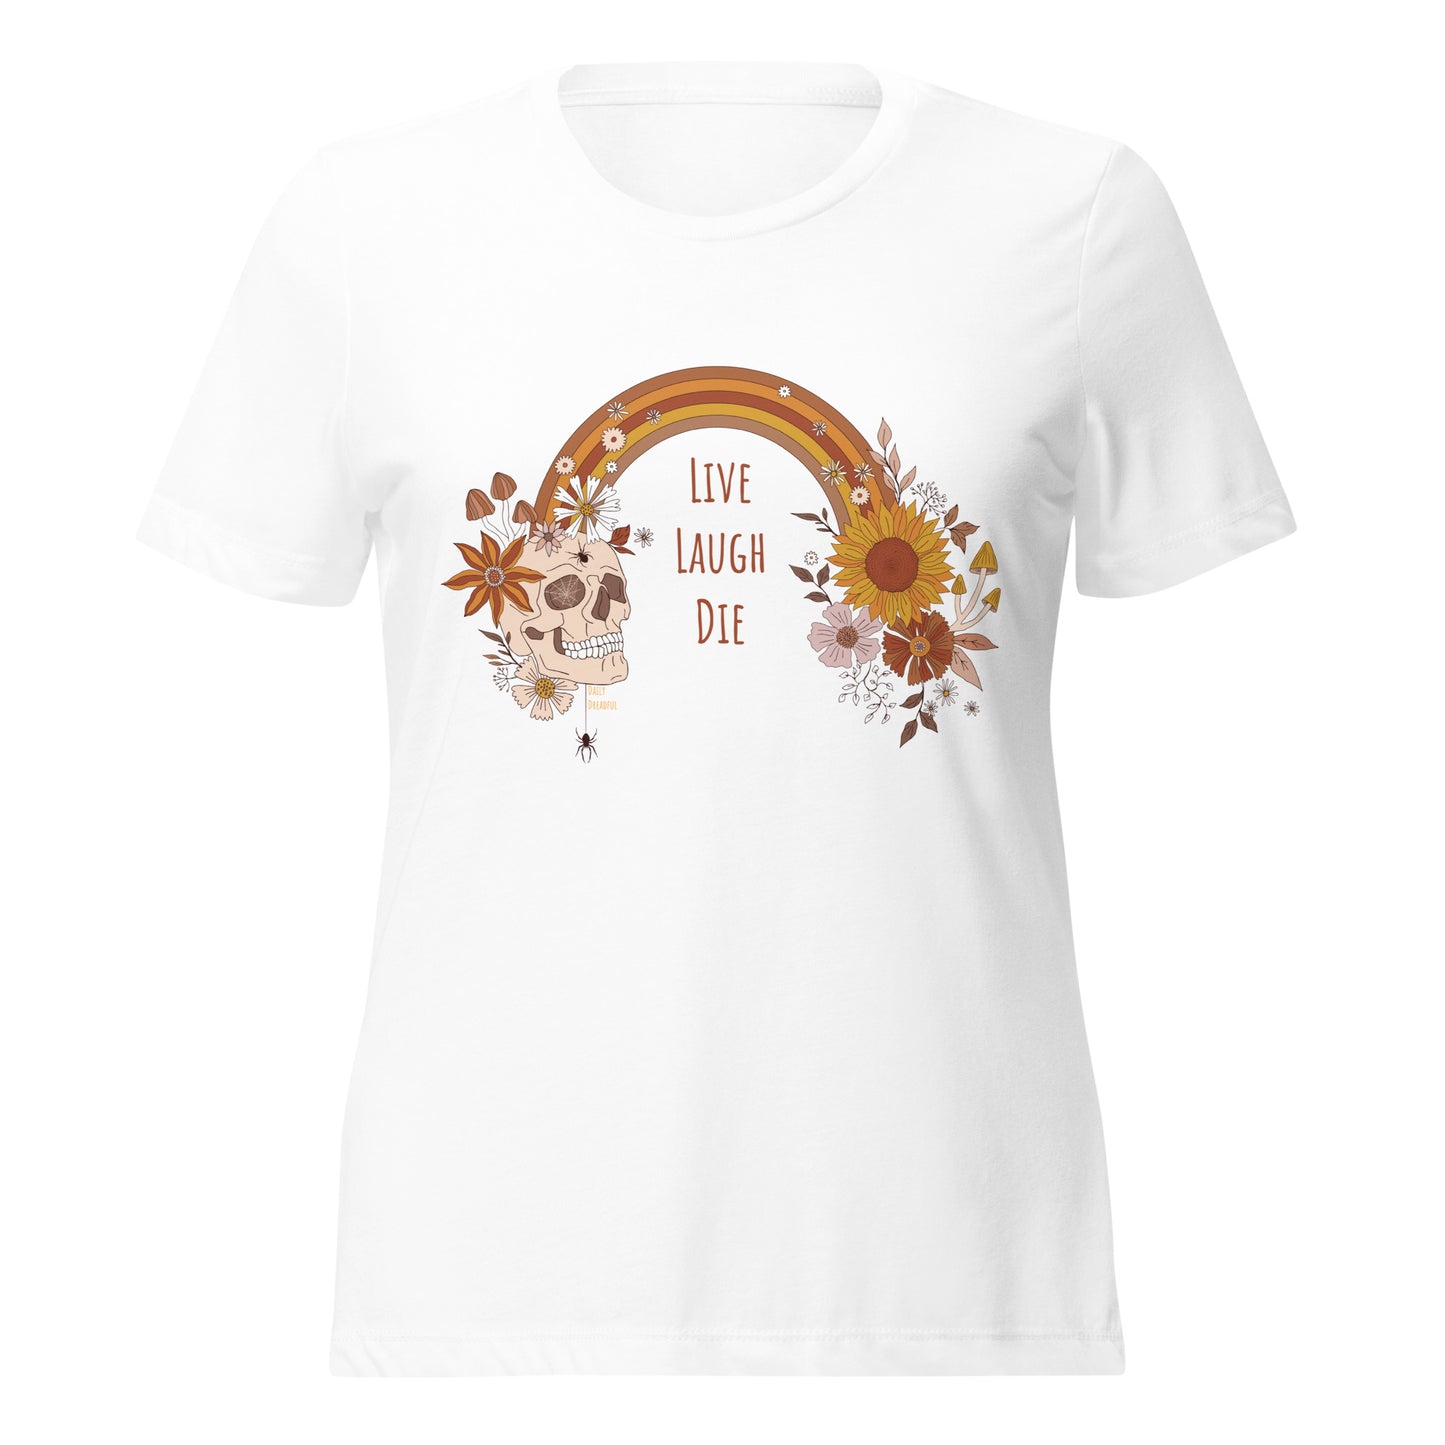 "Live, Laugh, Die" relaxed tri-blend t-shirt, white colored tee